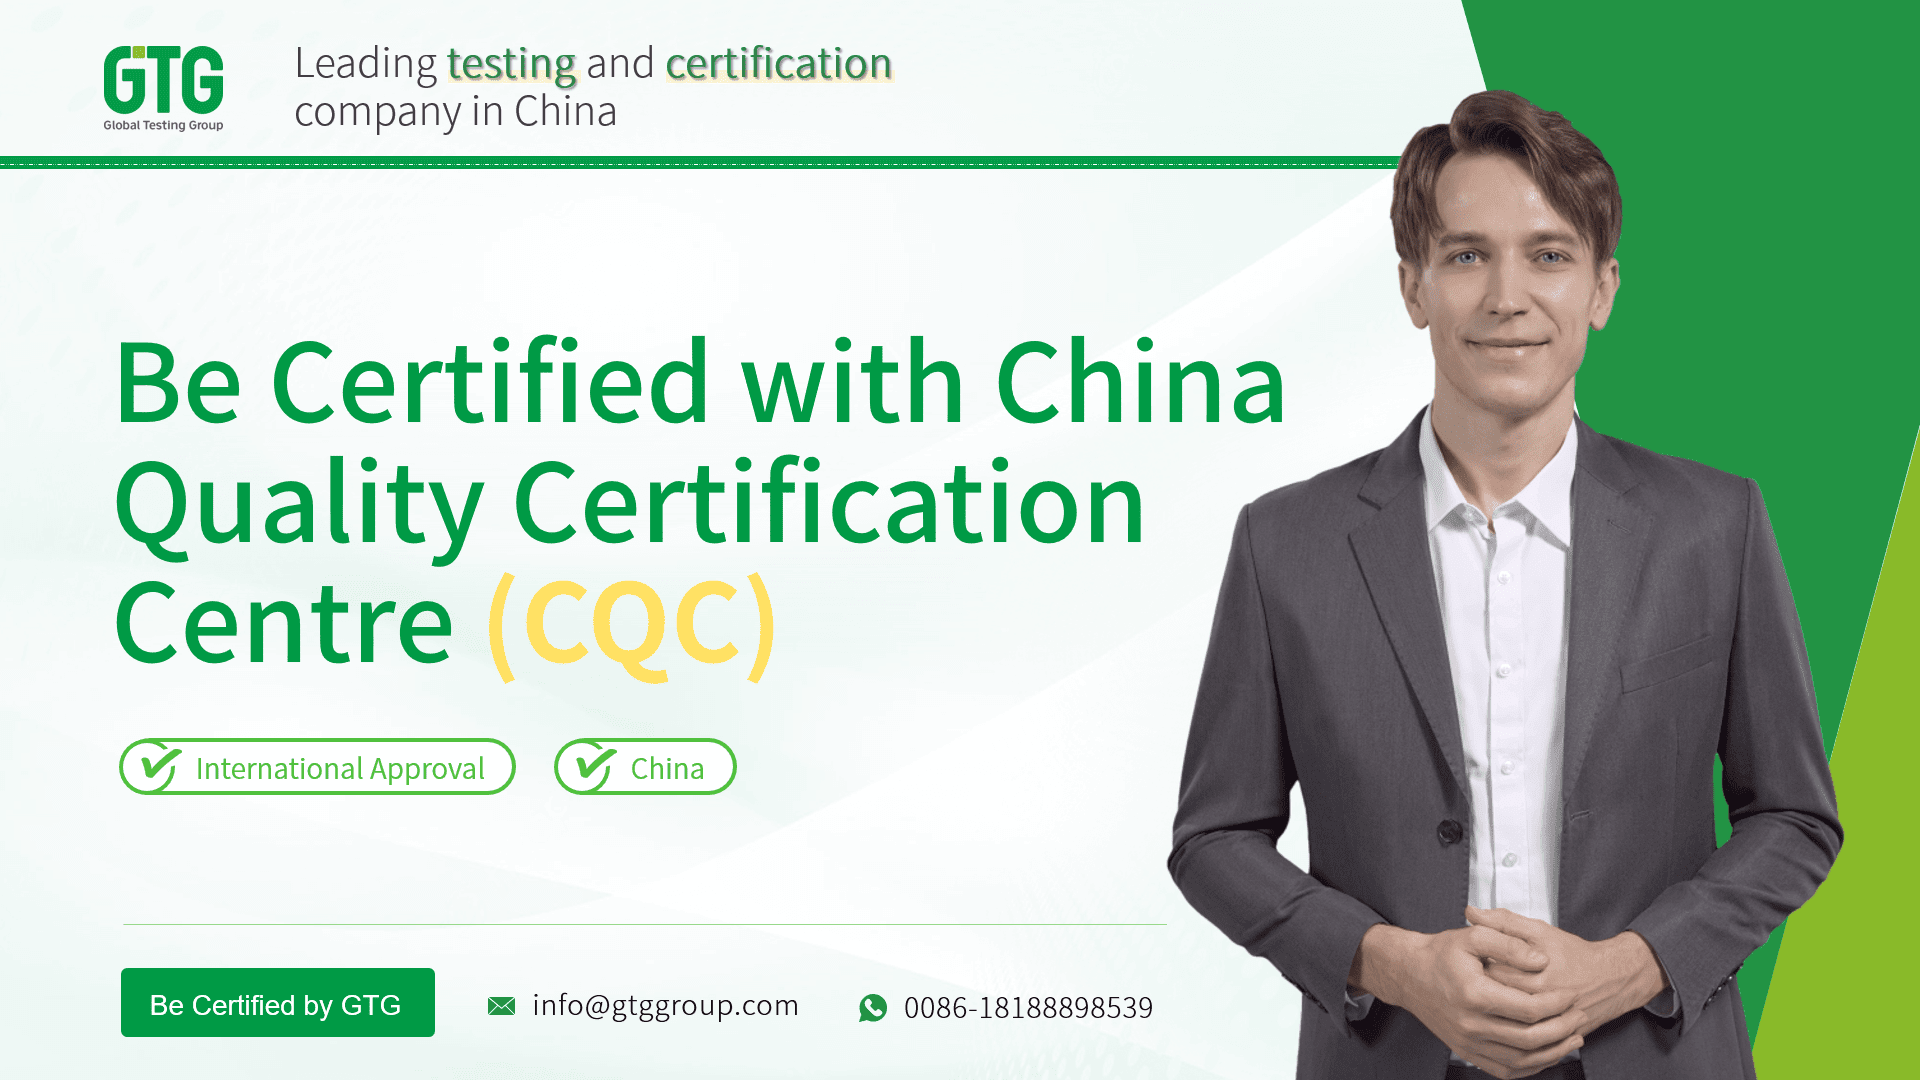 GTG Provides China Quality Certification Centre (CQC) Recognition Service